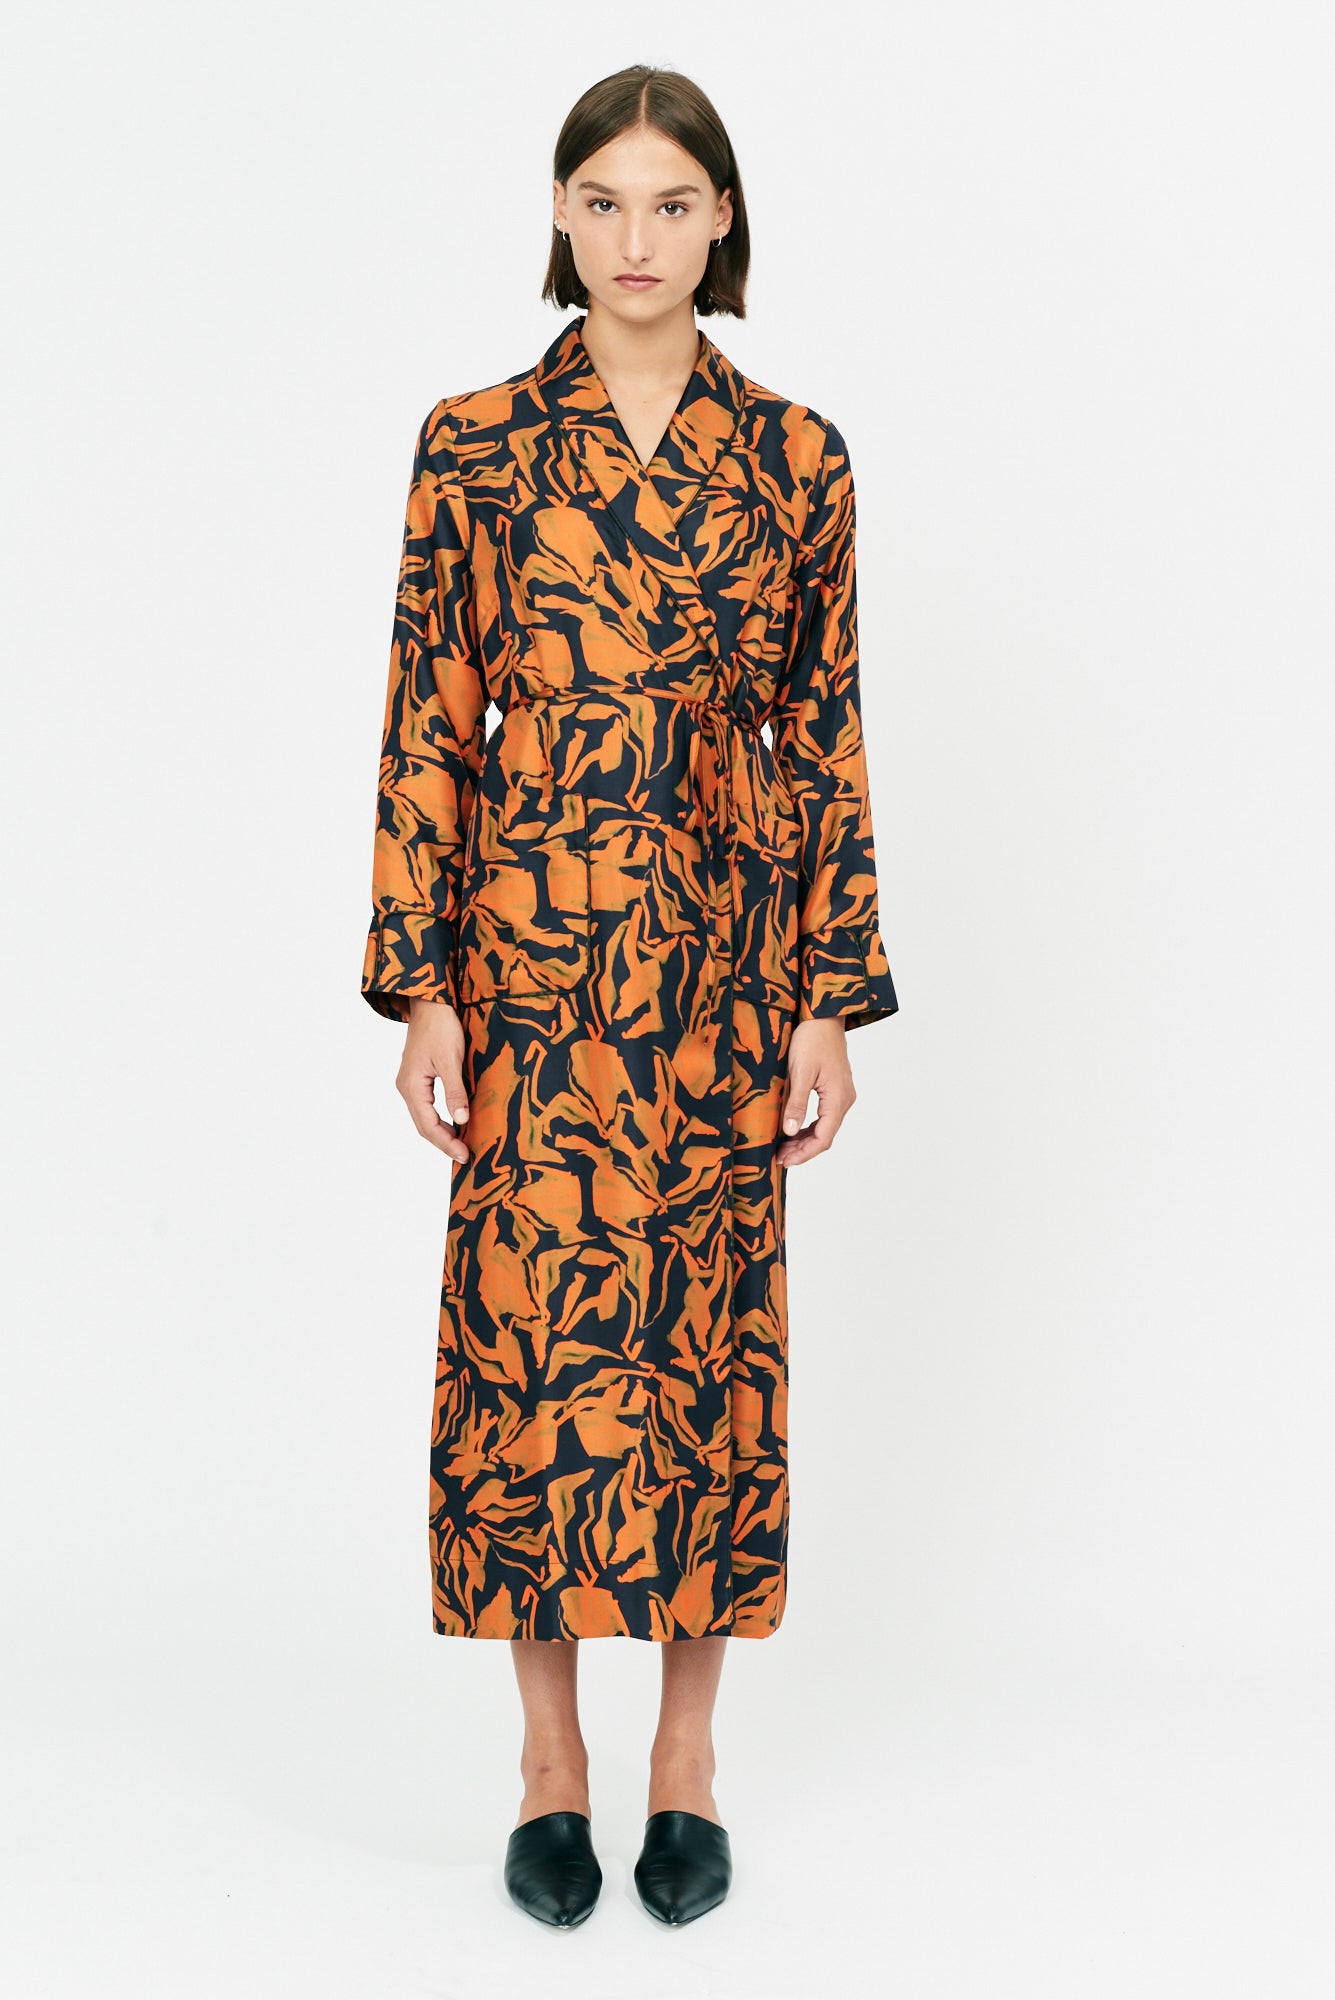 Painted Abstract Forest Vibrations Silk Print Robe Dress Full Front View